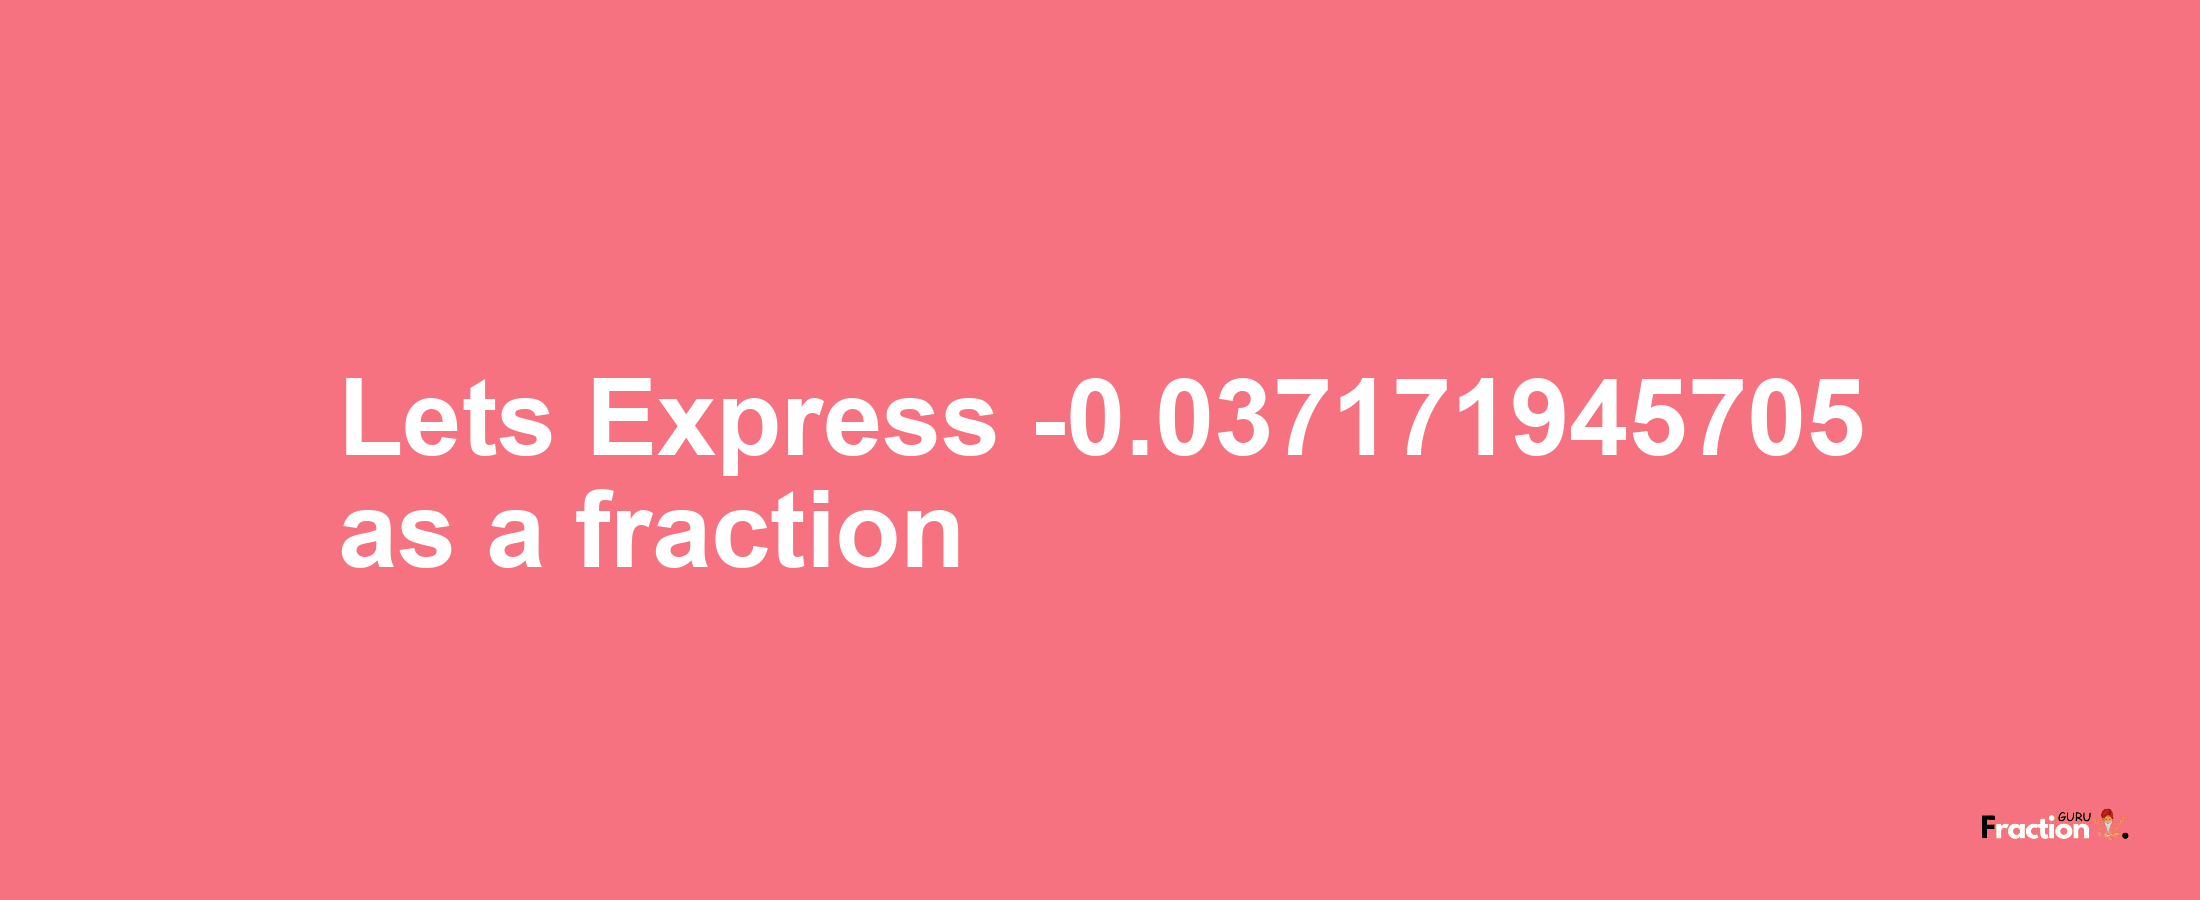 Lets Express -0.037171945705 as afraction